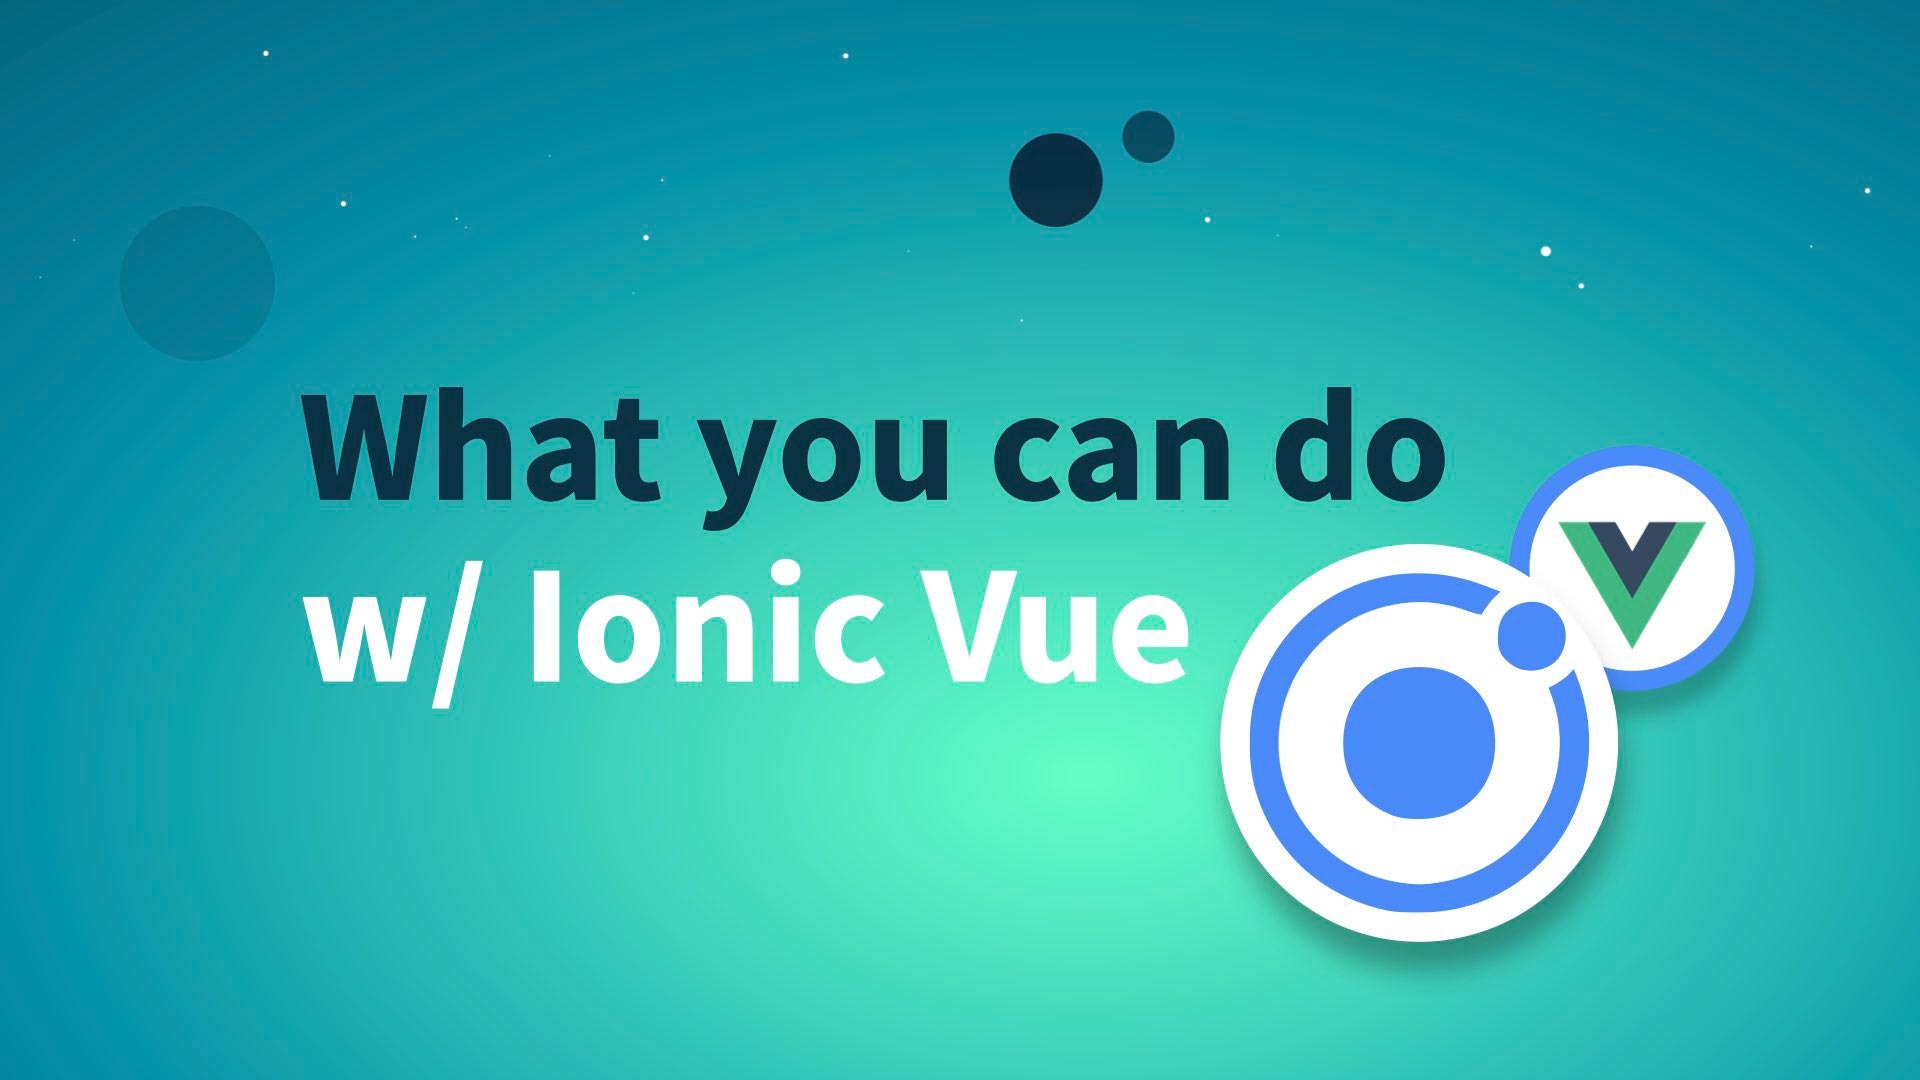 What you can do with Ionic Vue